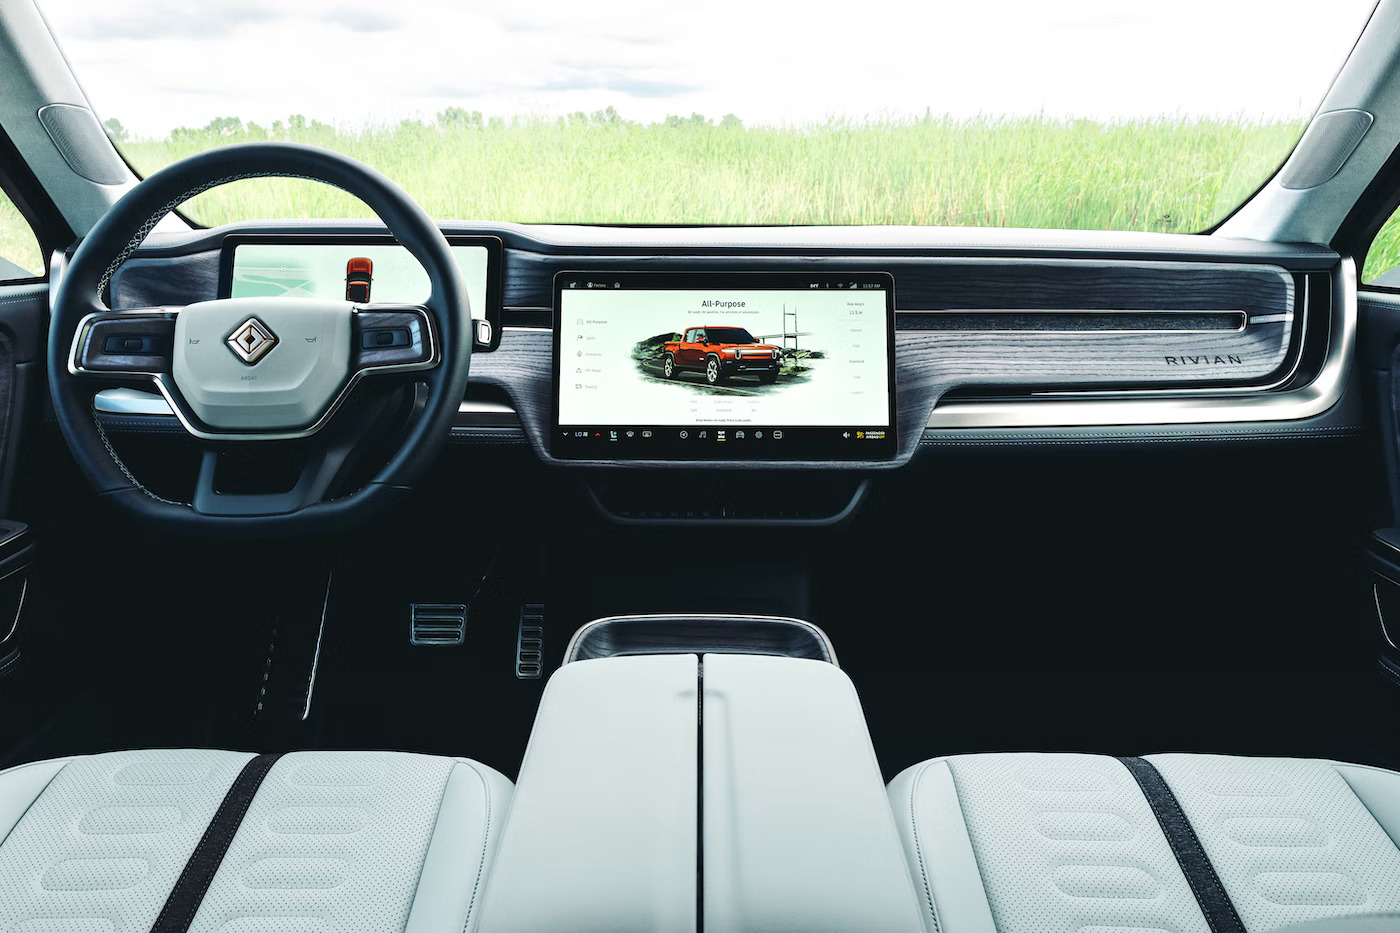 Rivian to expand vehicle camera functionality in upcoming OTA update